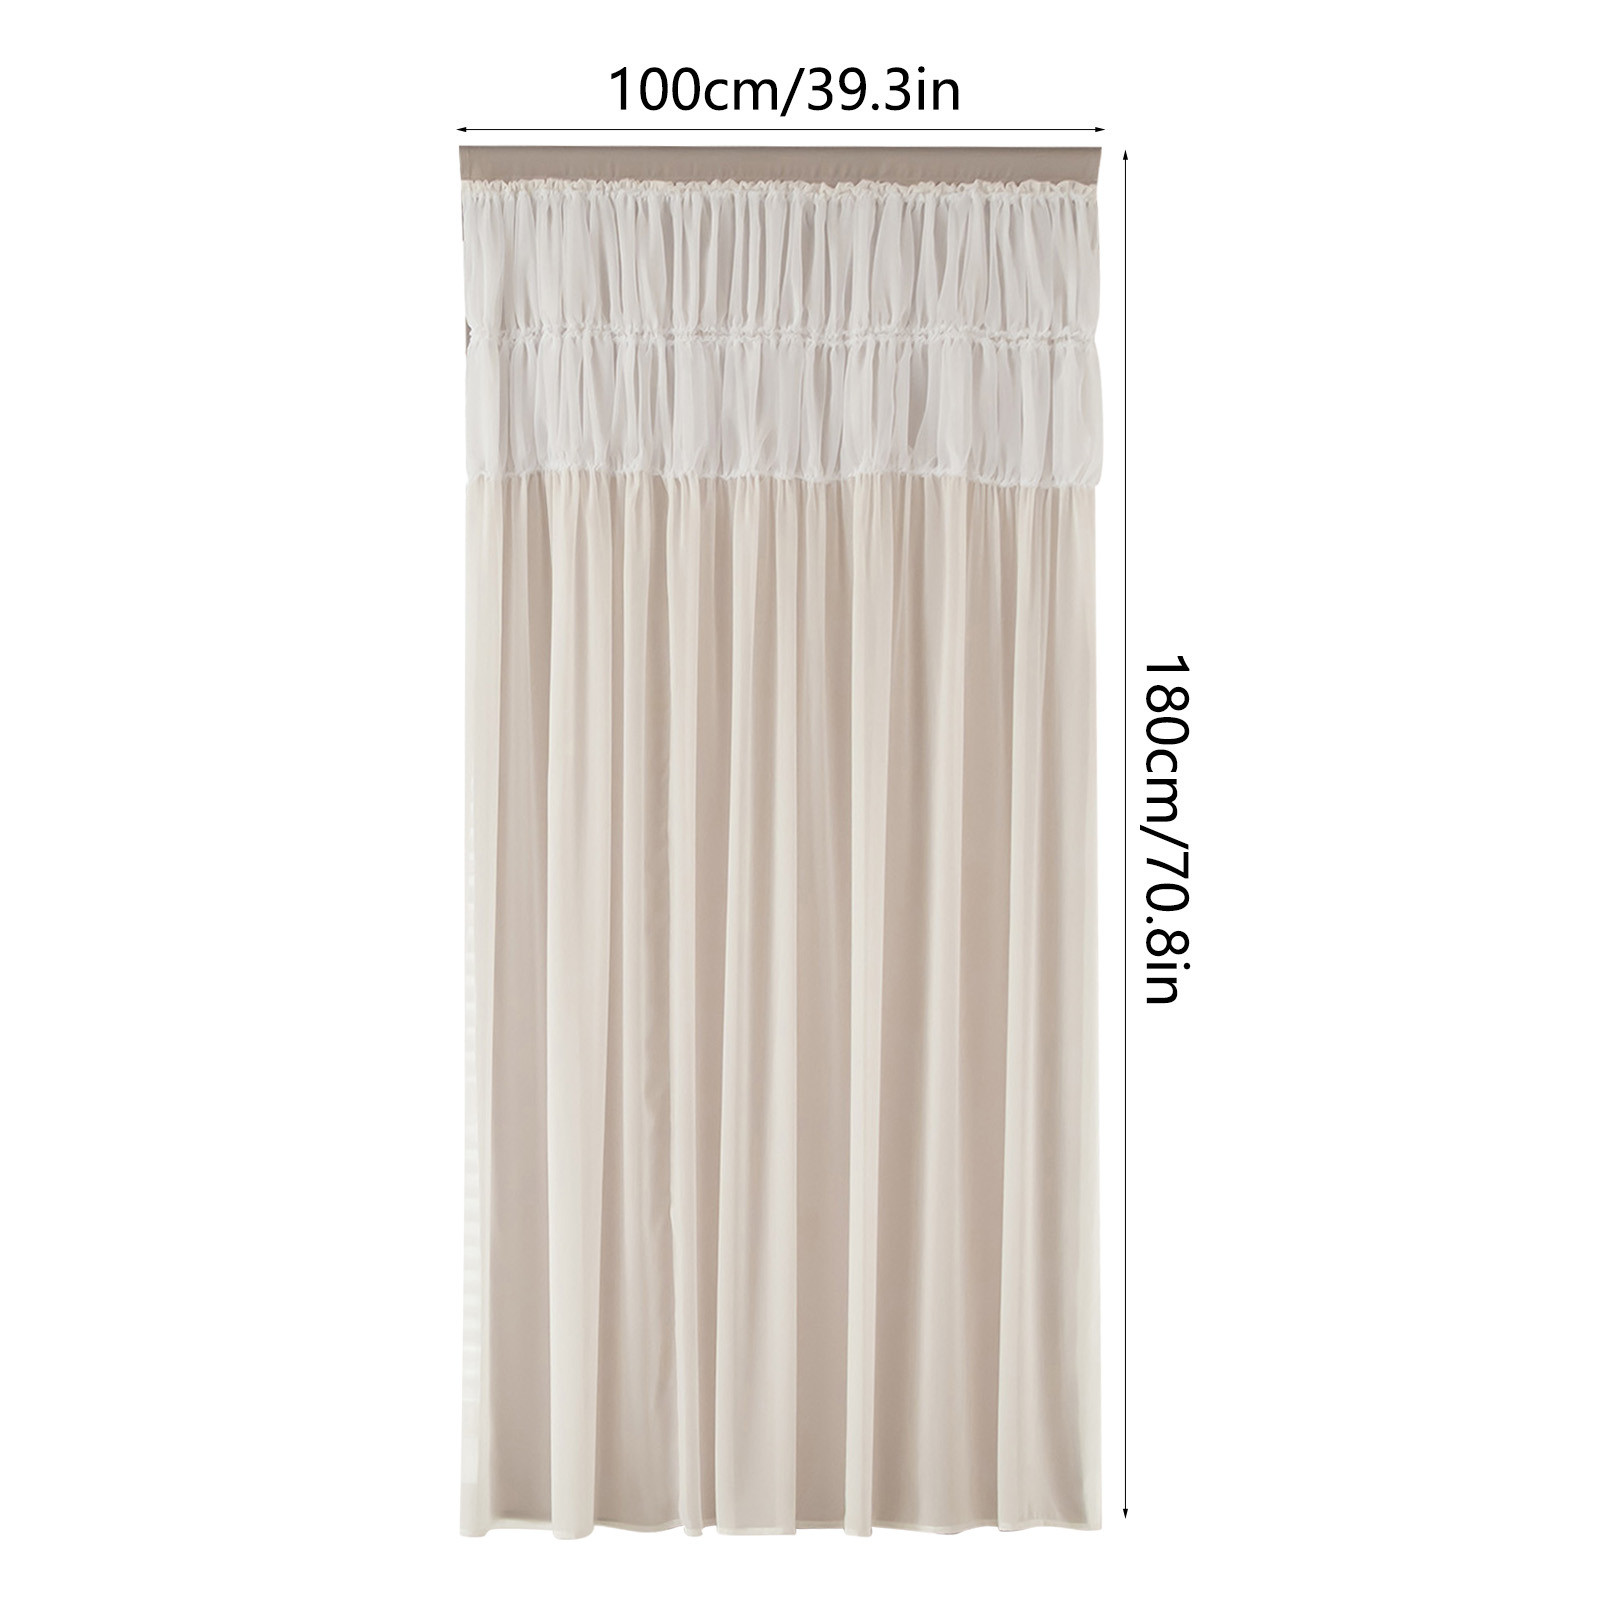 Curtain Short Length Cold Curtains 2 Panels Home Curtains Layered Solid Plain Panels And Sheer Sheer Curtains Window Curtain Panels 39"" Wide Curtains for Windows 66 to 120 Curtains Rose - image 3 of 9